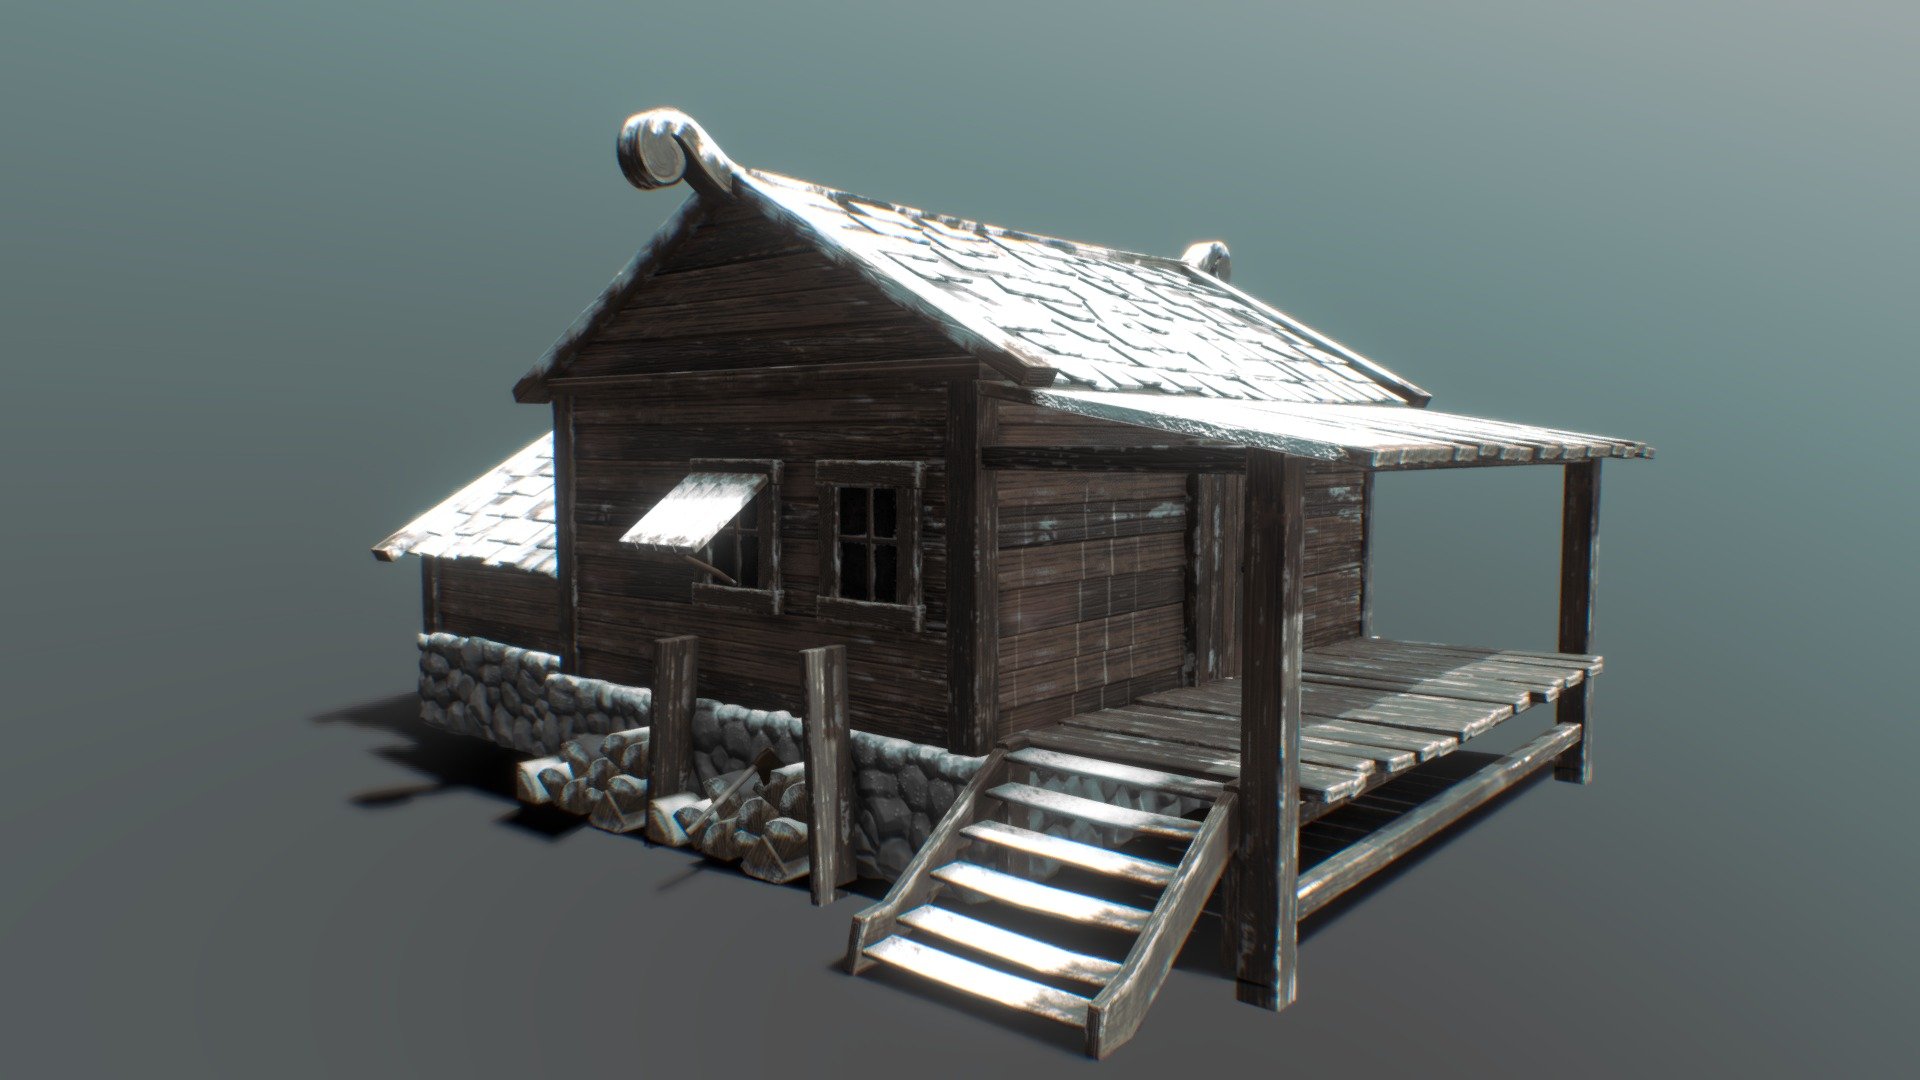 an old wood cabin made in maya,  sculpted in zbrush, textured in substance.
this is part of a modular set that i made for a game demo 3d model